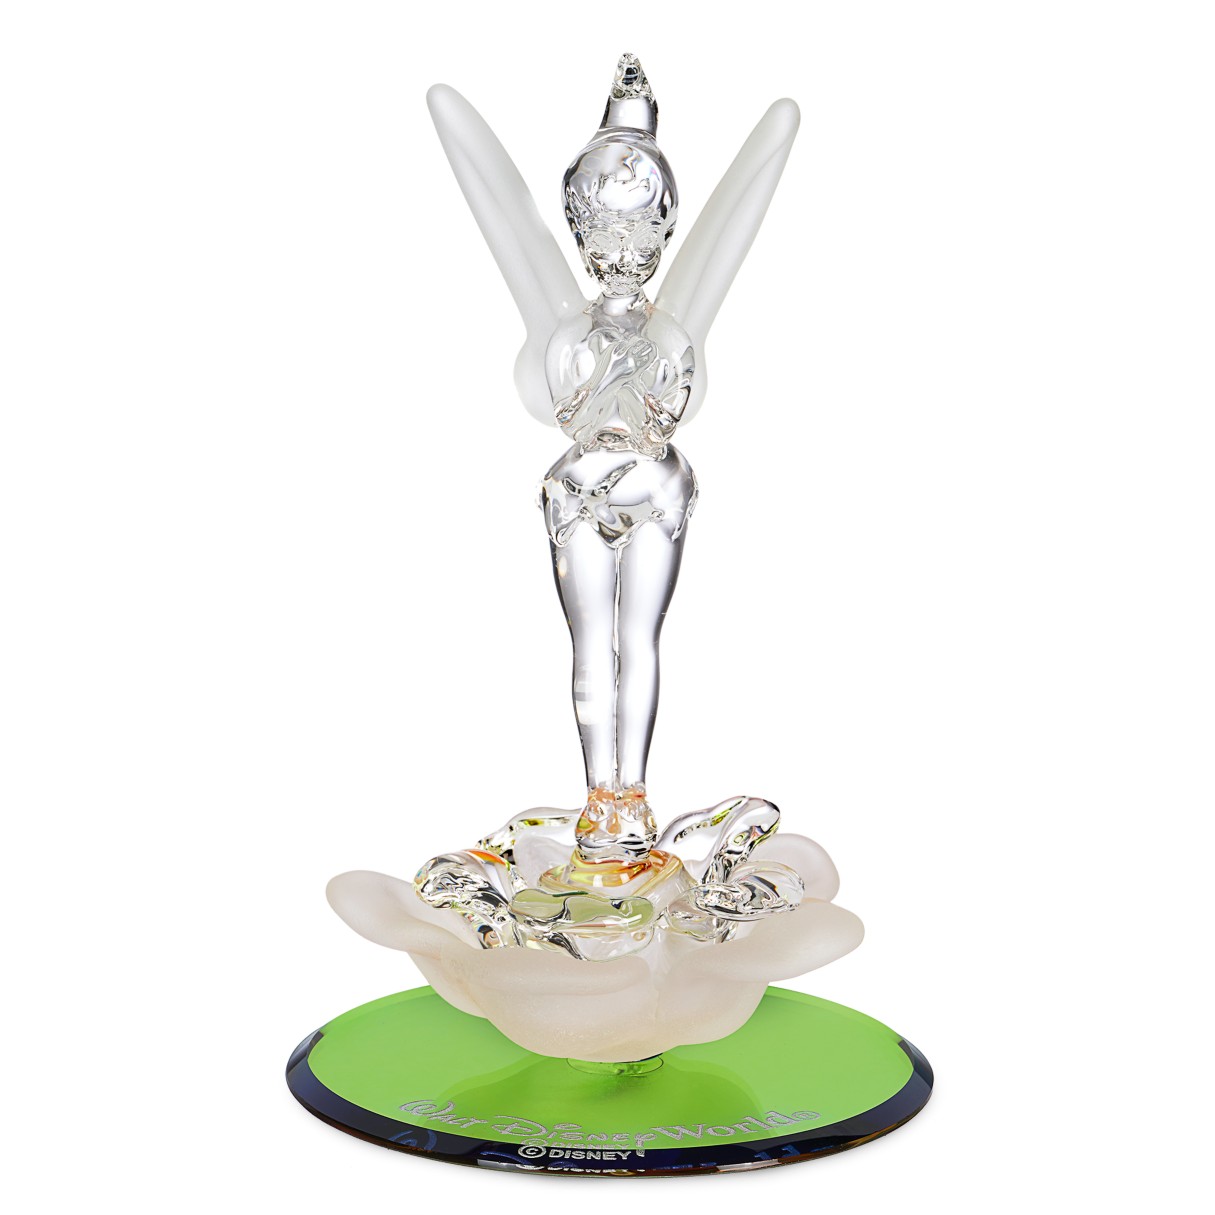 Tinker Bell Flower Figurine by Arribas Brothers